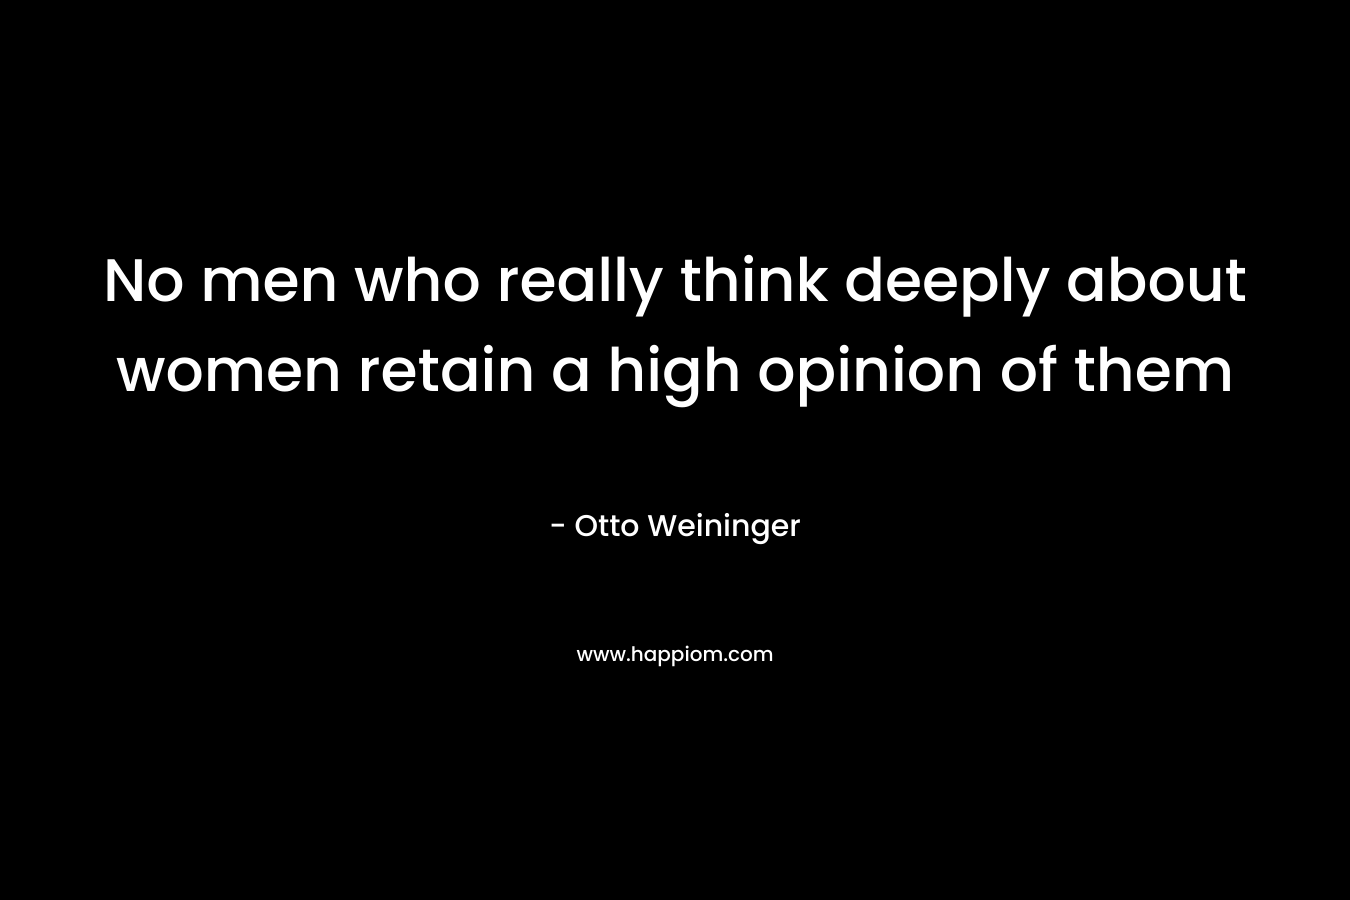 No men who really think deeply about women retain a high opinion of them